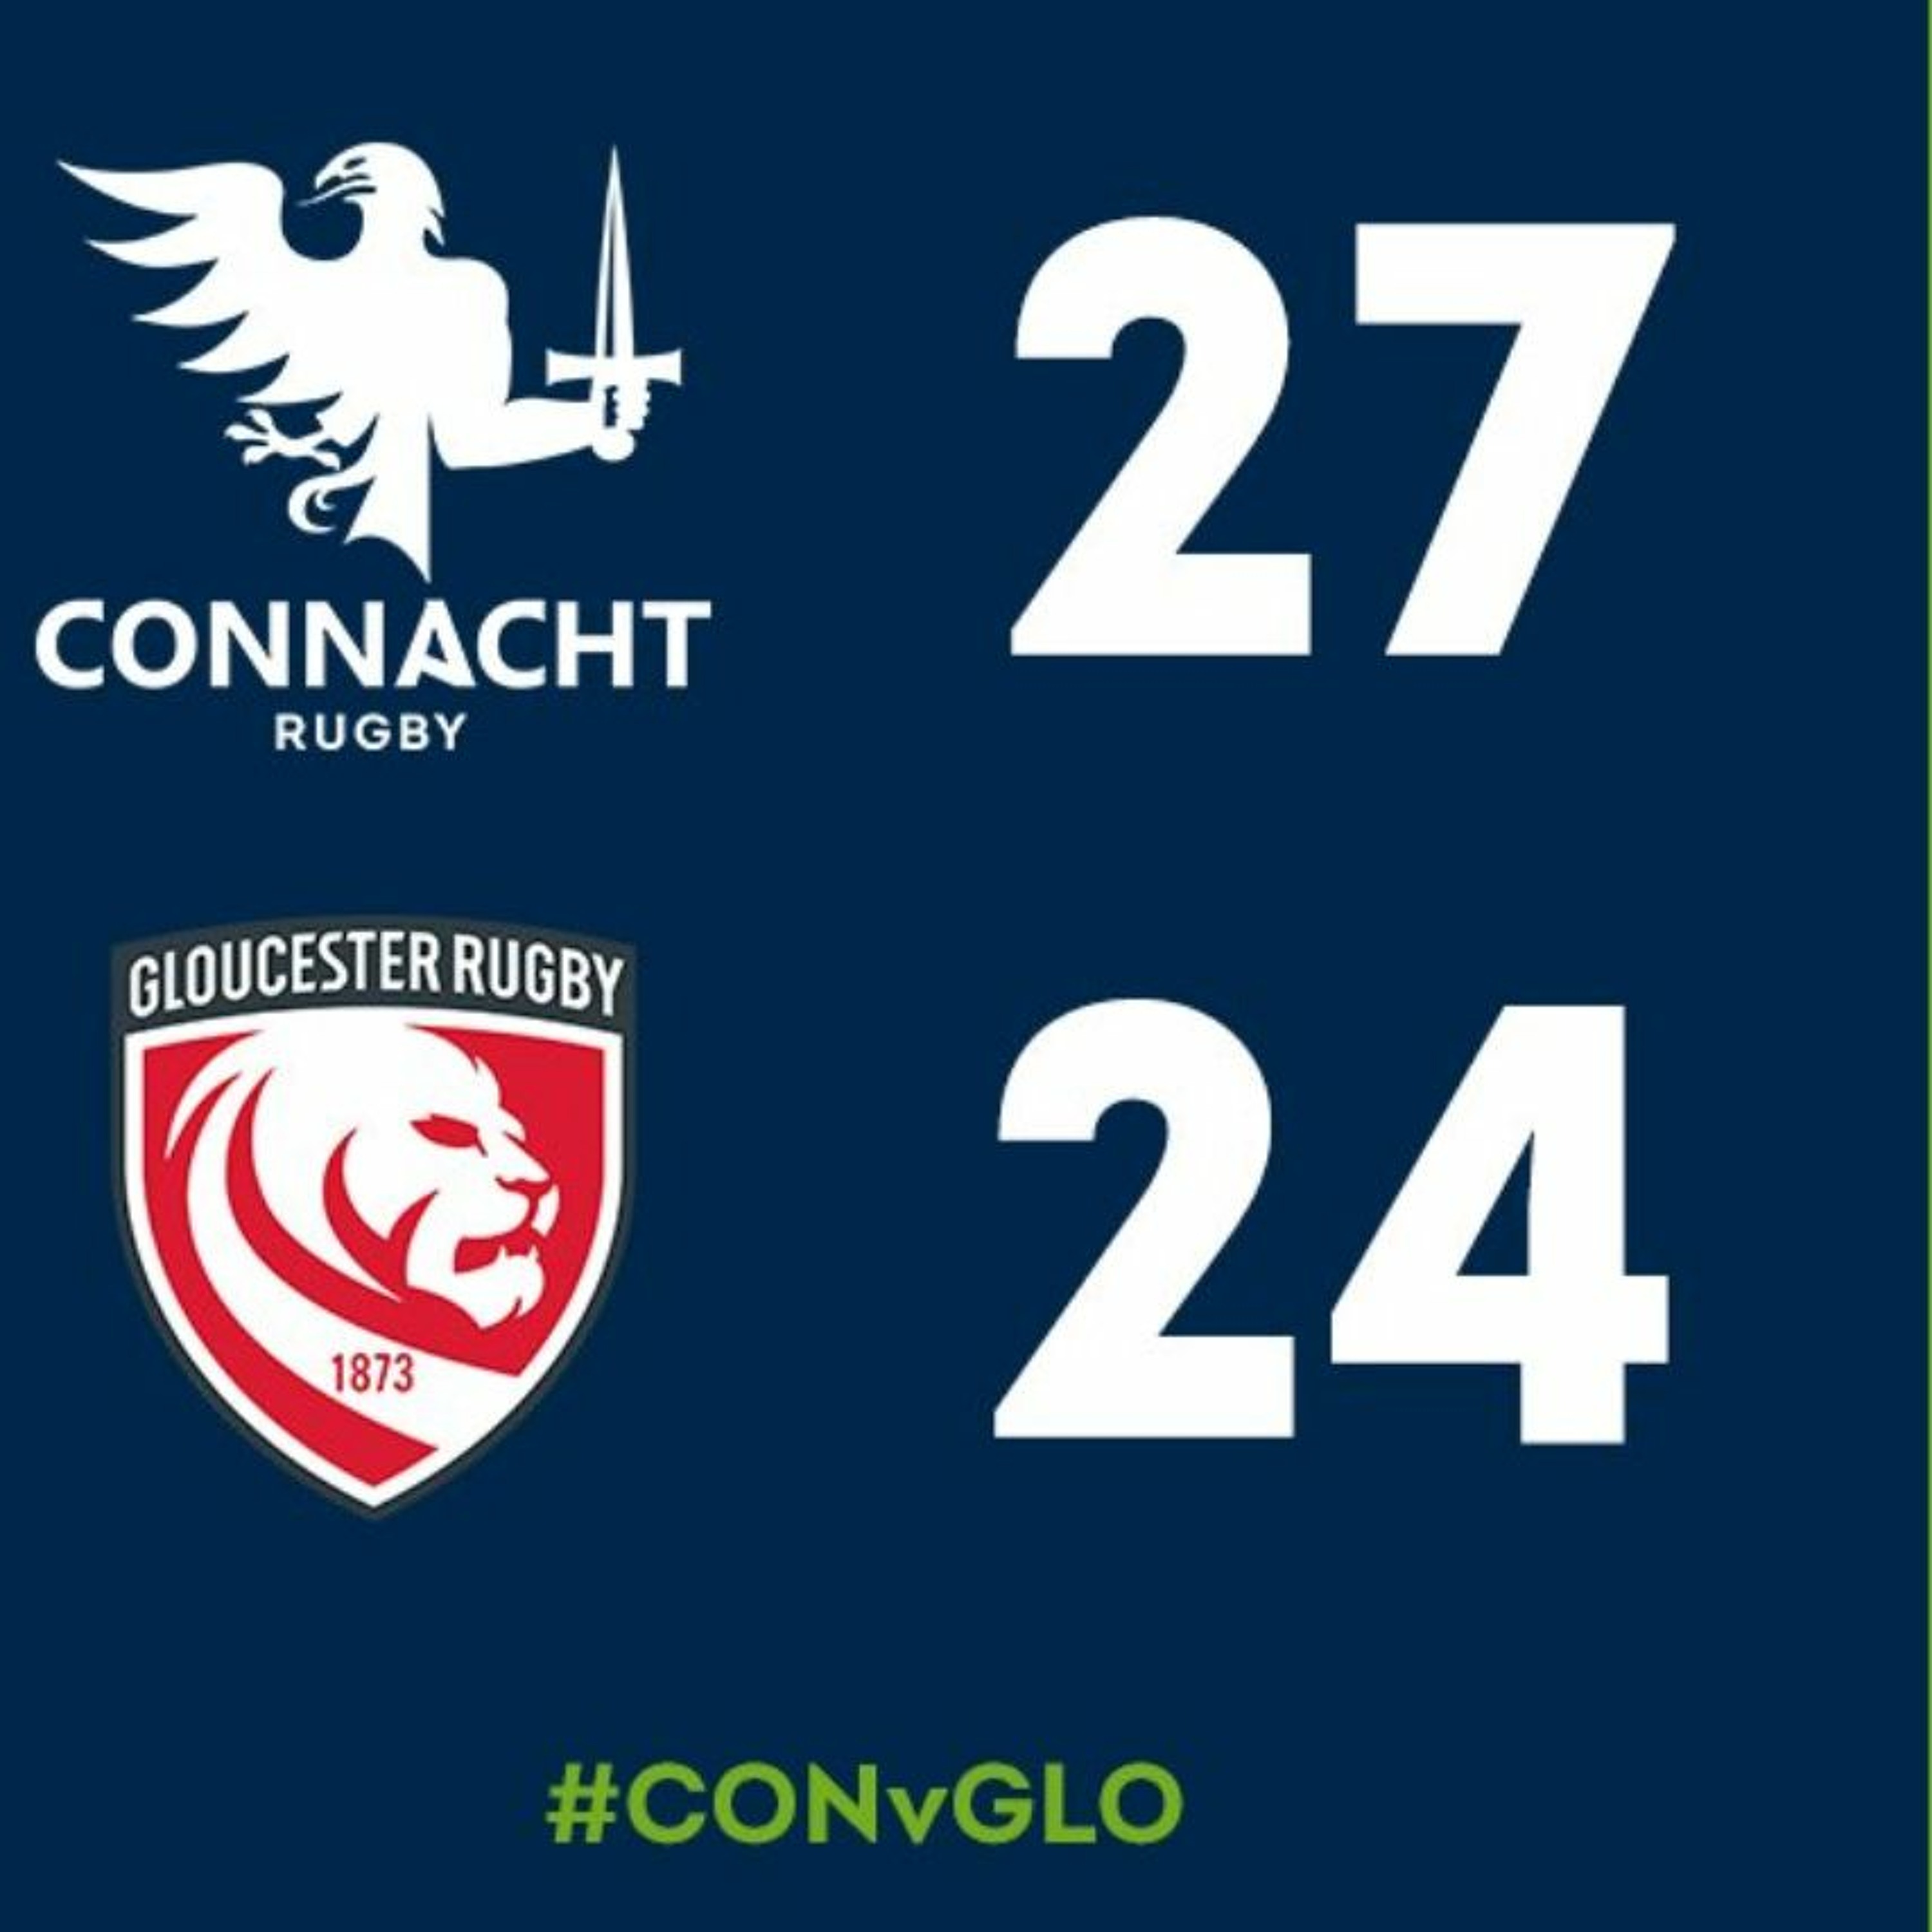 Gloucester home review - Craggy Rugby podcast Connacht coverage S5E22